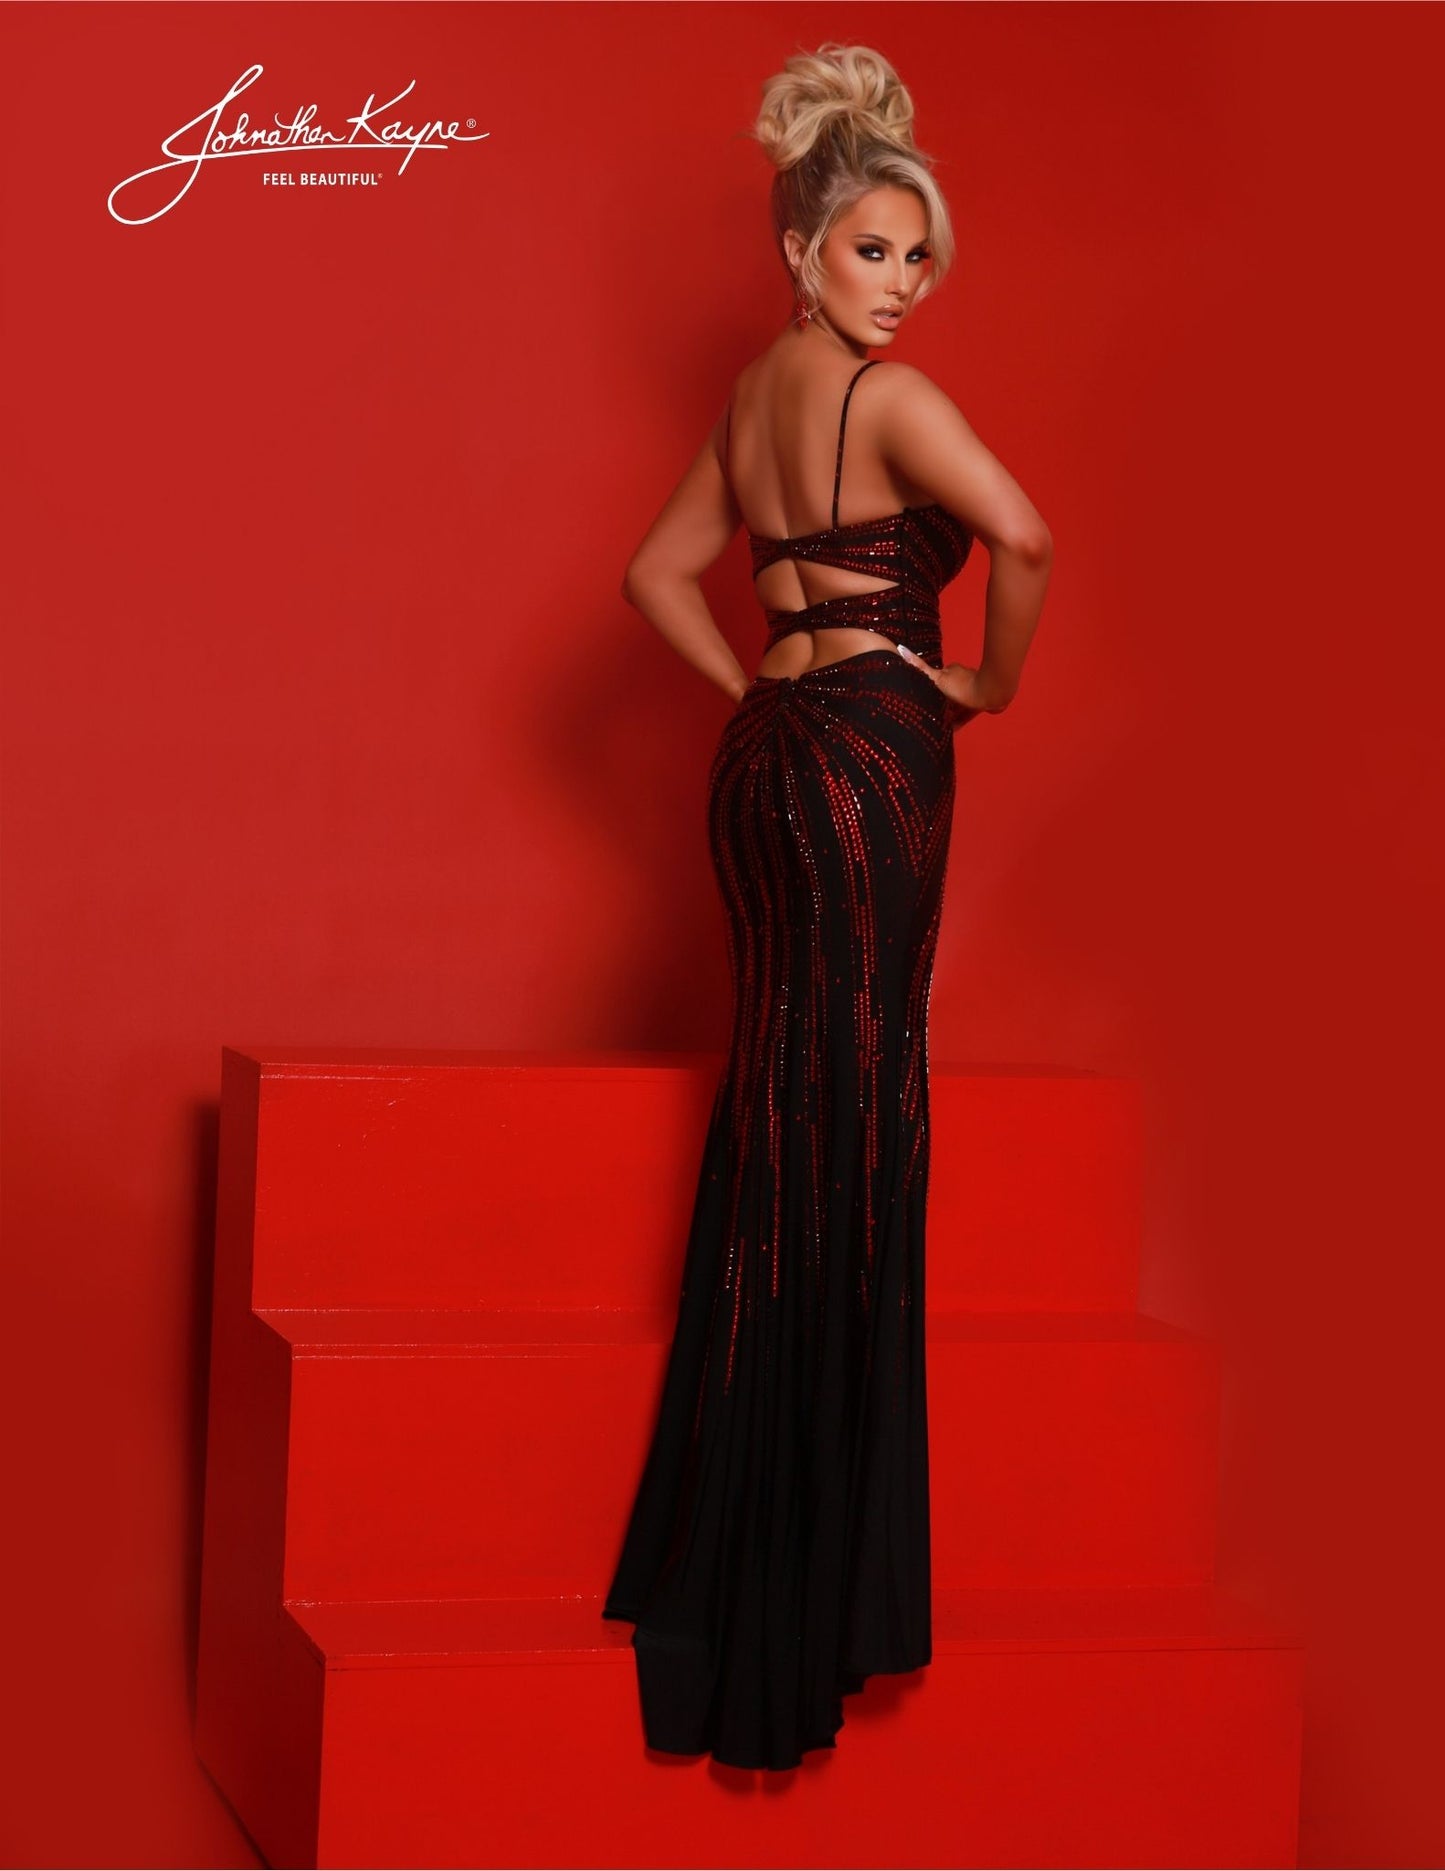 Johnathan Kayne 2880 is the perfect formal gown for special occasions. Its beautiful low V-neckline, beaded, high slit, train, and fitted design make it a timeless classic. Its fitted silhouette flatters every body shape and the added beading makes it dazzling. Make a statement in this stunning evening gown. Dress to dazzle! Crafted from 4-Way Stretch Lycra, it's designed for movement and style. The radiating beadwork catches the light as you twirl and sway. 